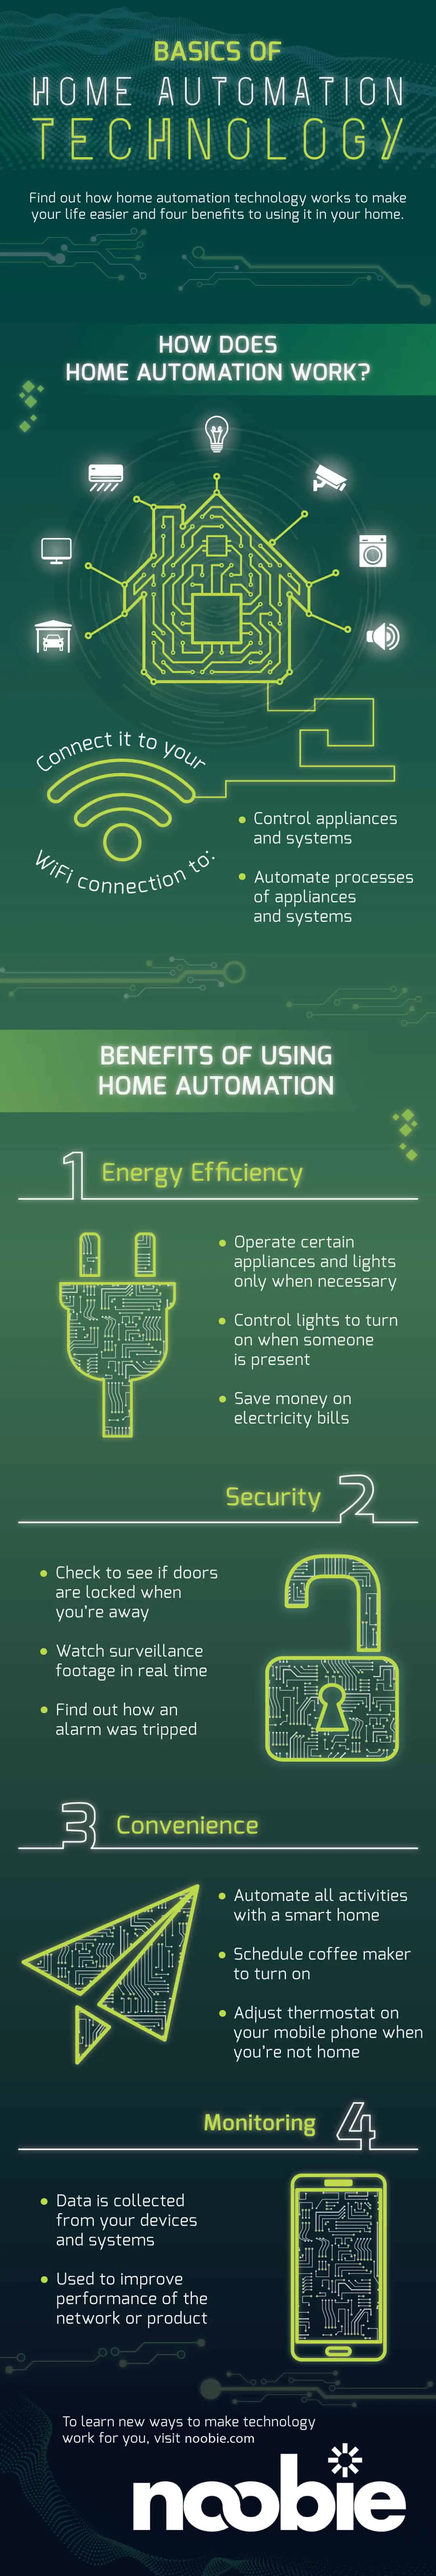 What Is Home Automation & How It Works | Noobie